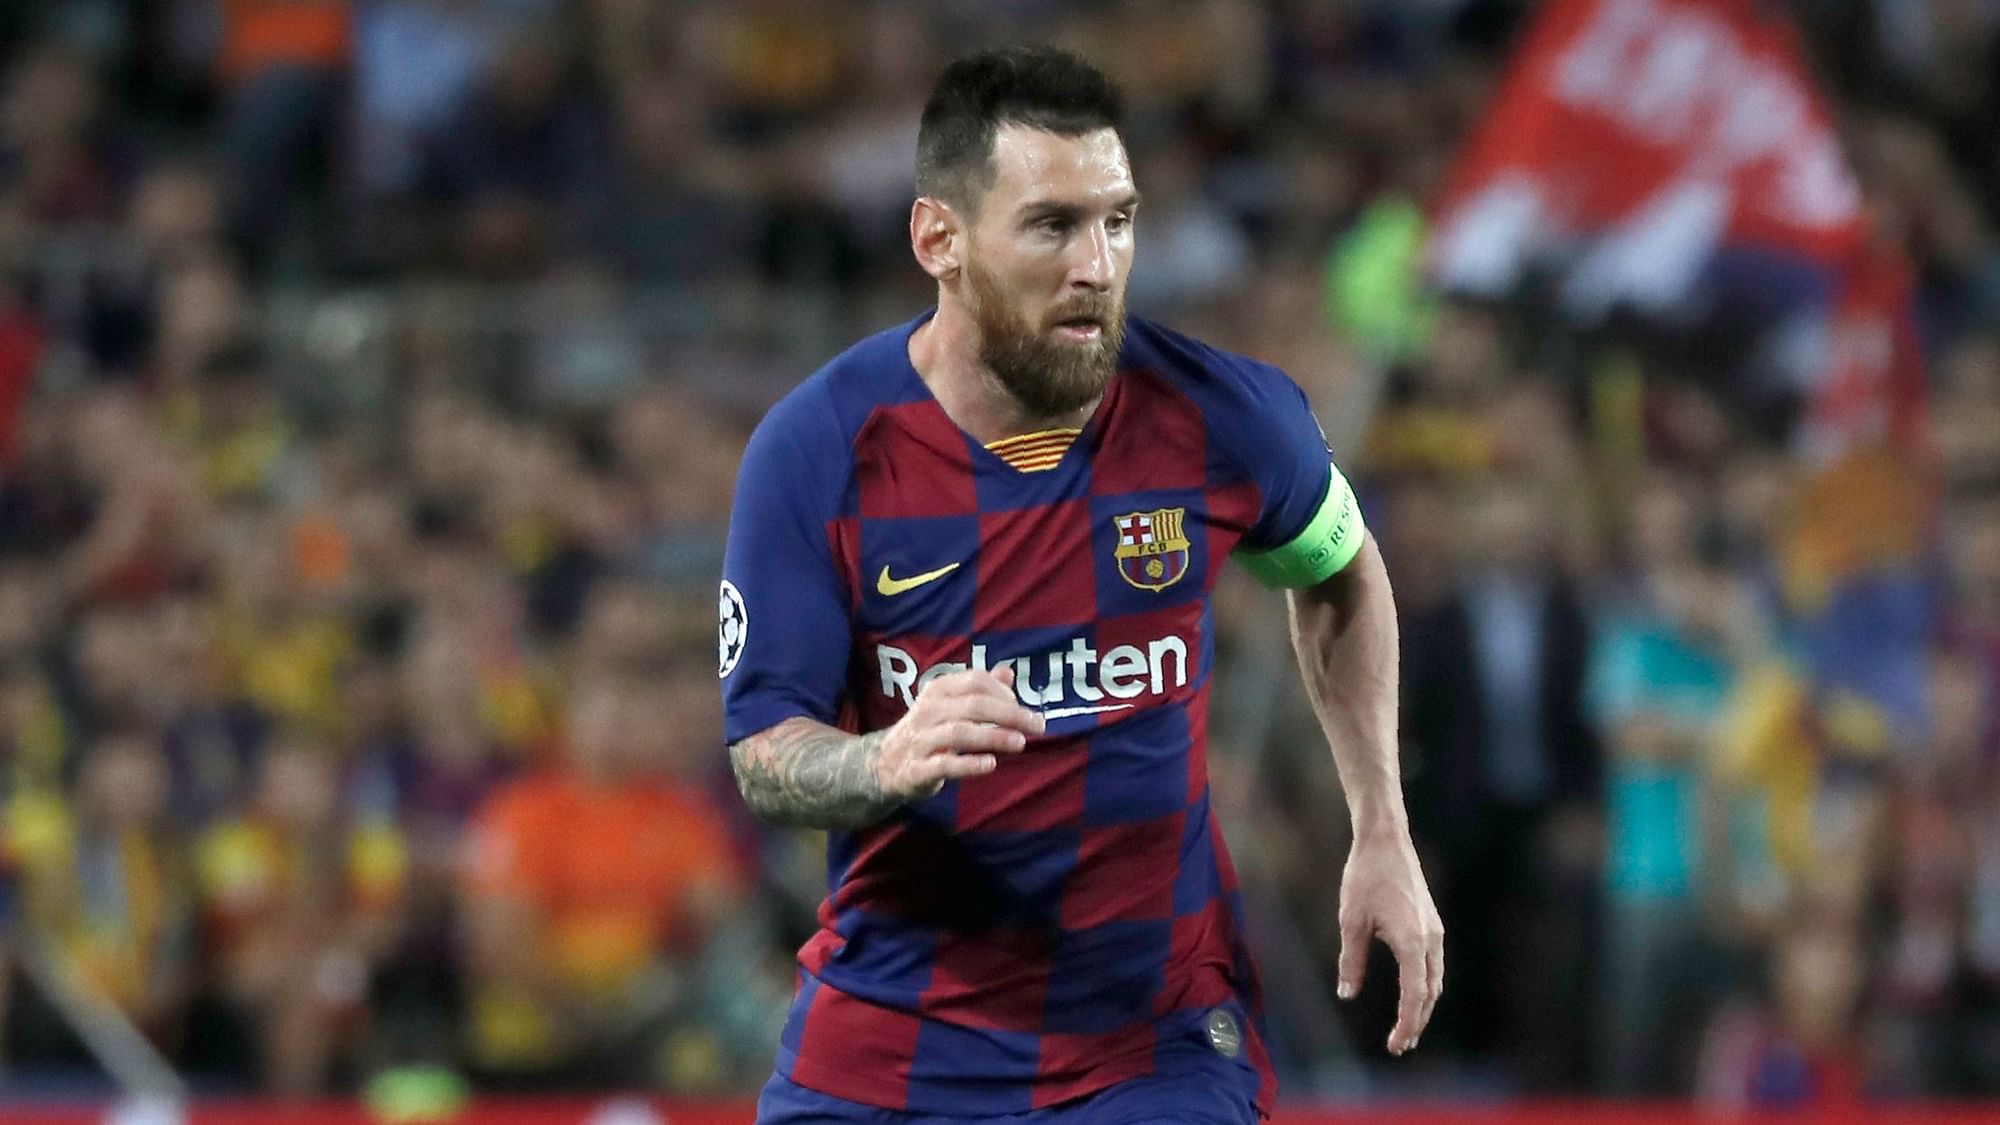 Lionel Messi says he considered leaving Barcelona after being targeted by Spanish tax authorities in the early 2010s.